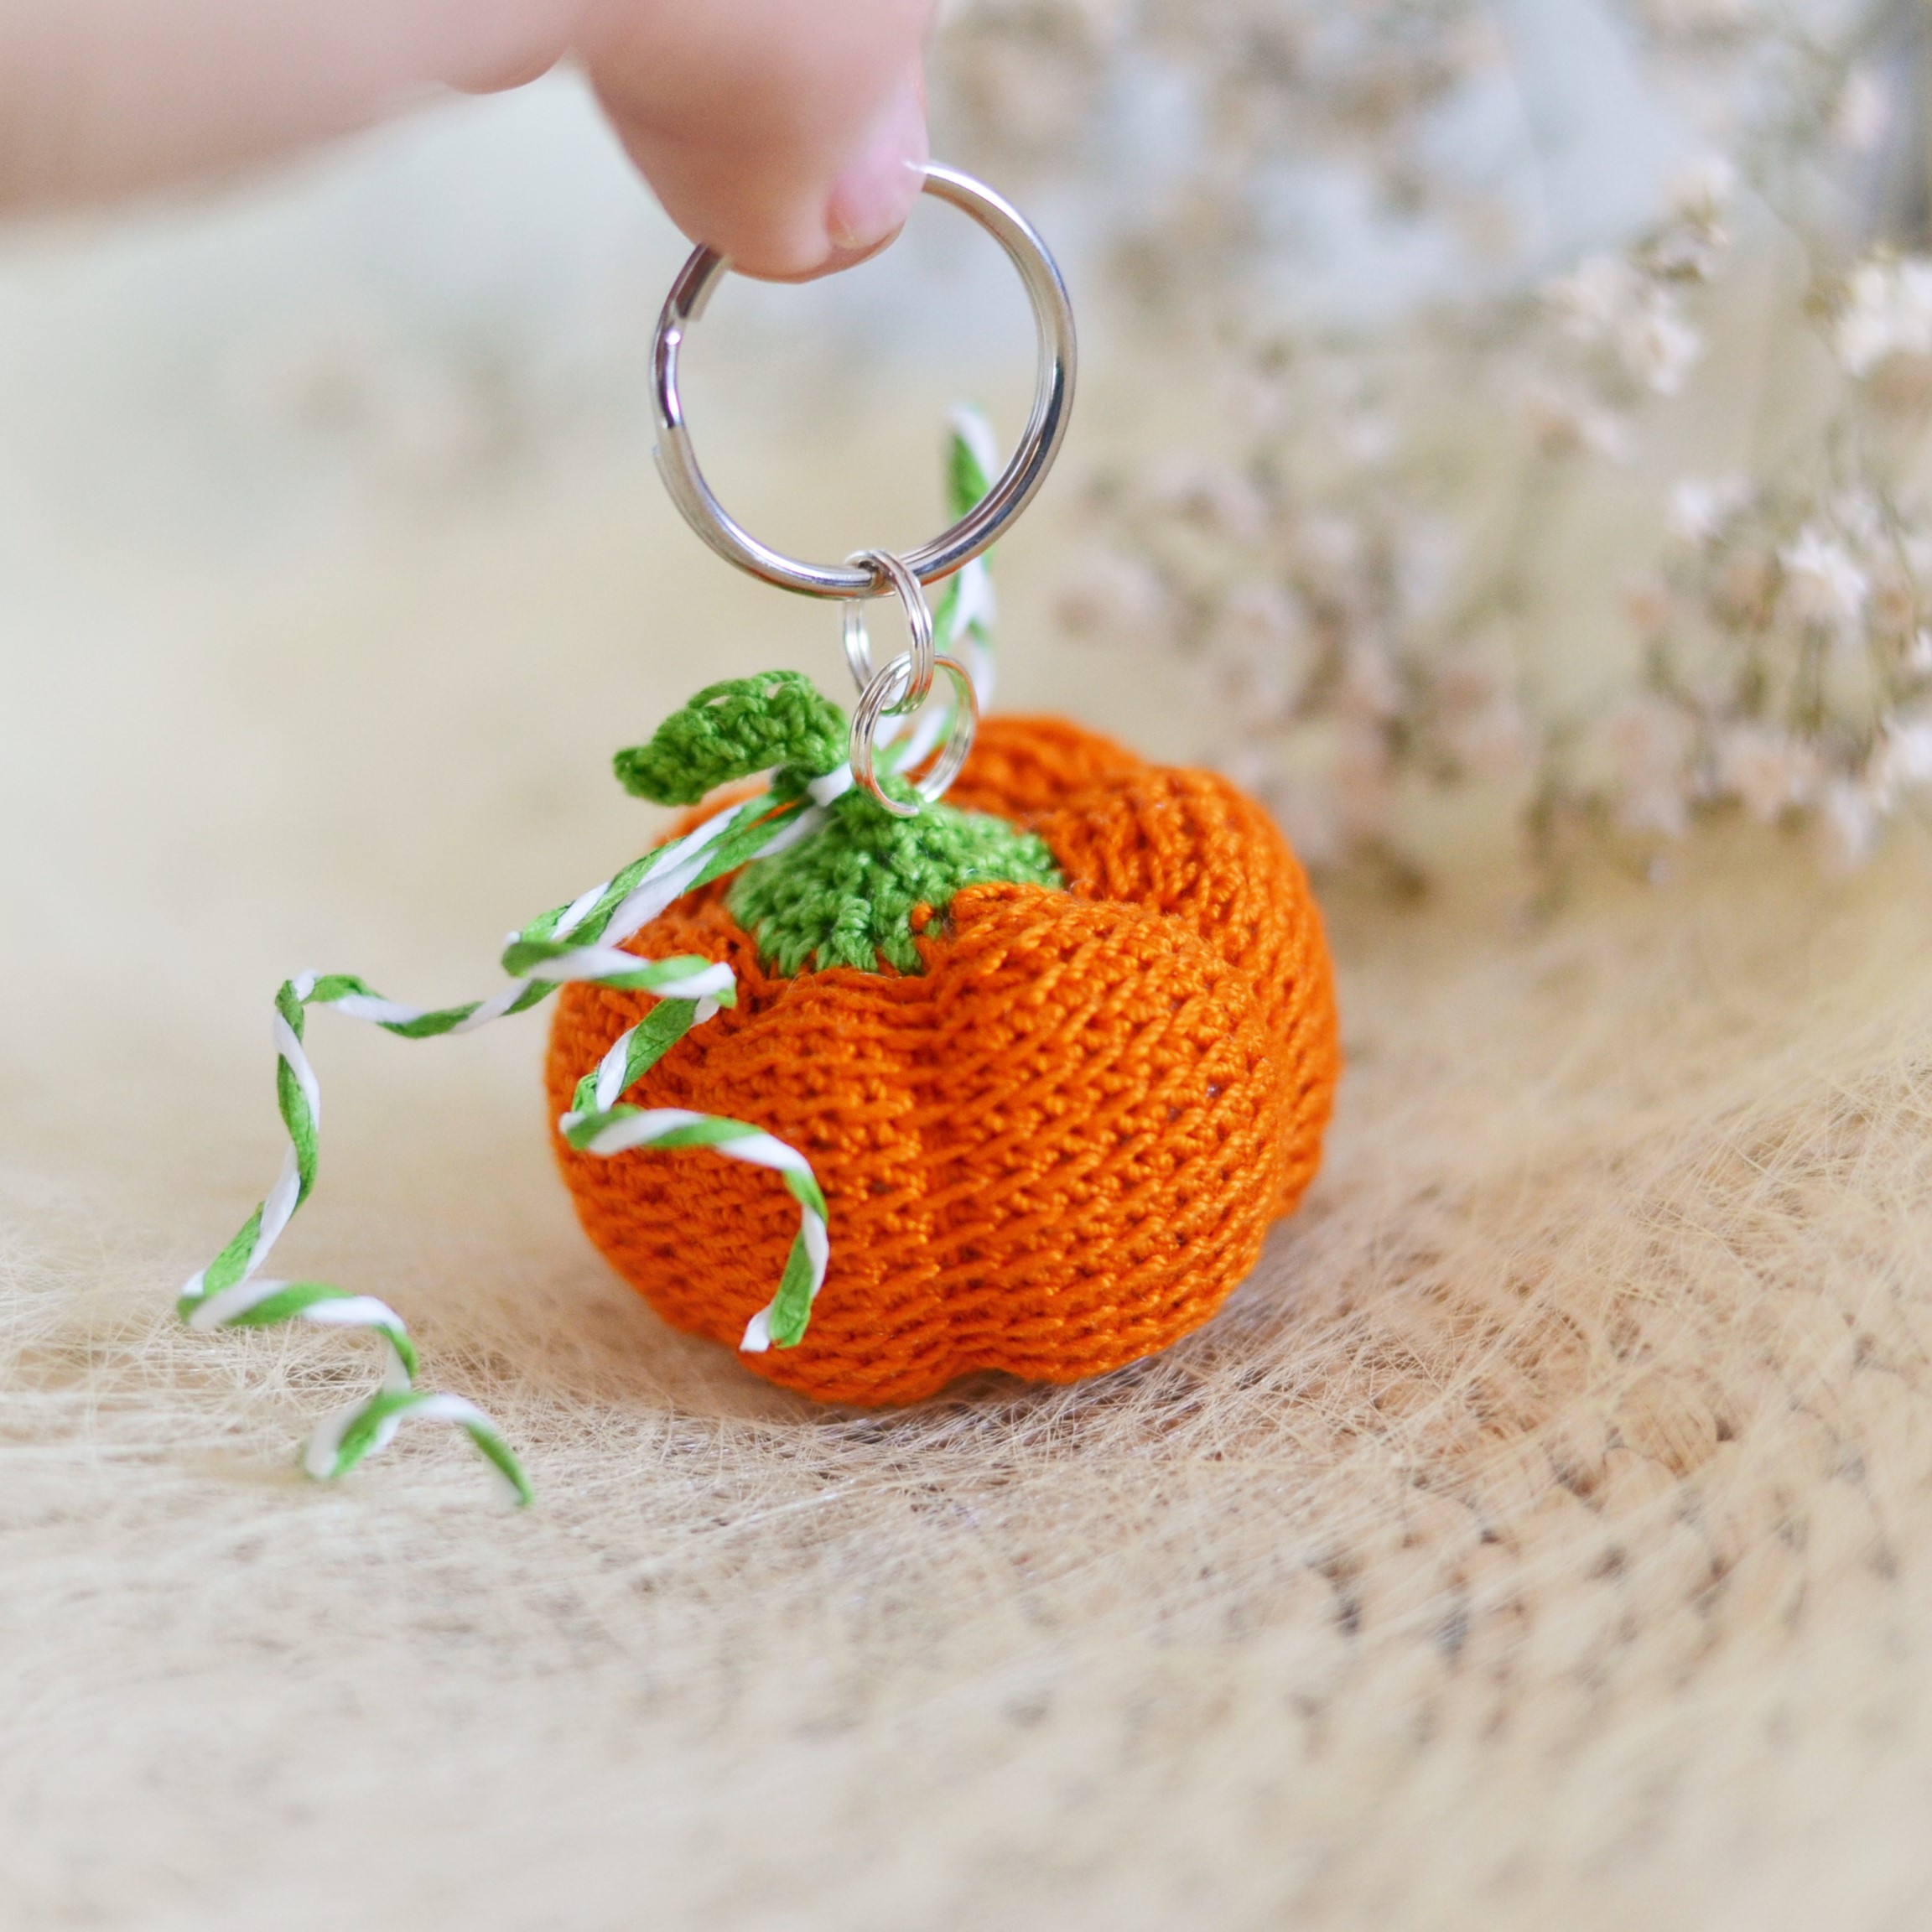 Fried Egg Purse - 08: How to crochet the bread keychain - YouTube